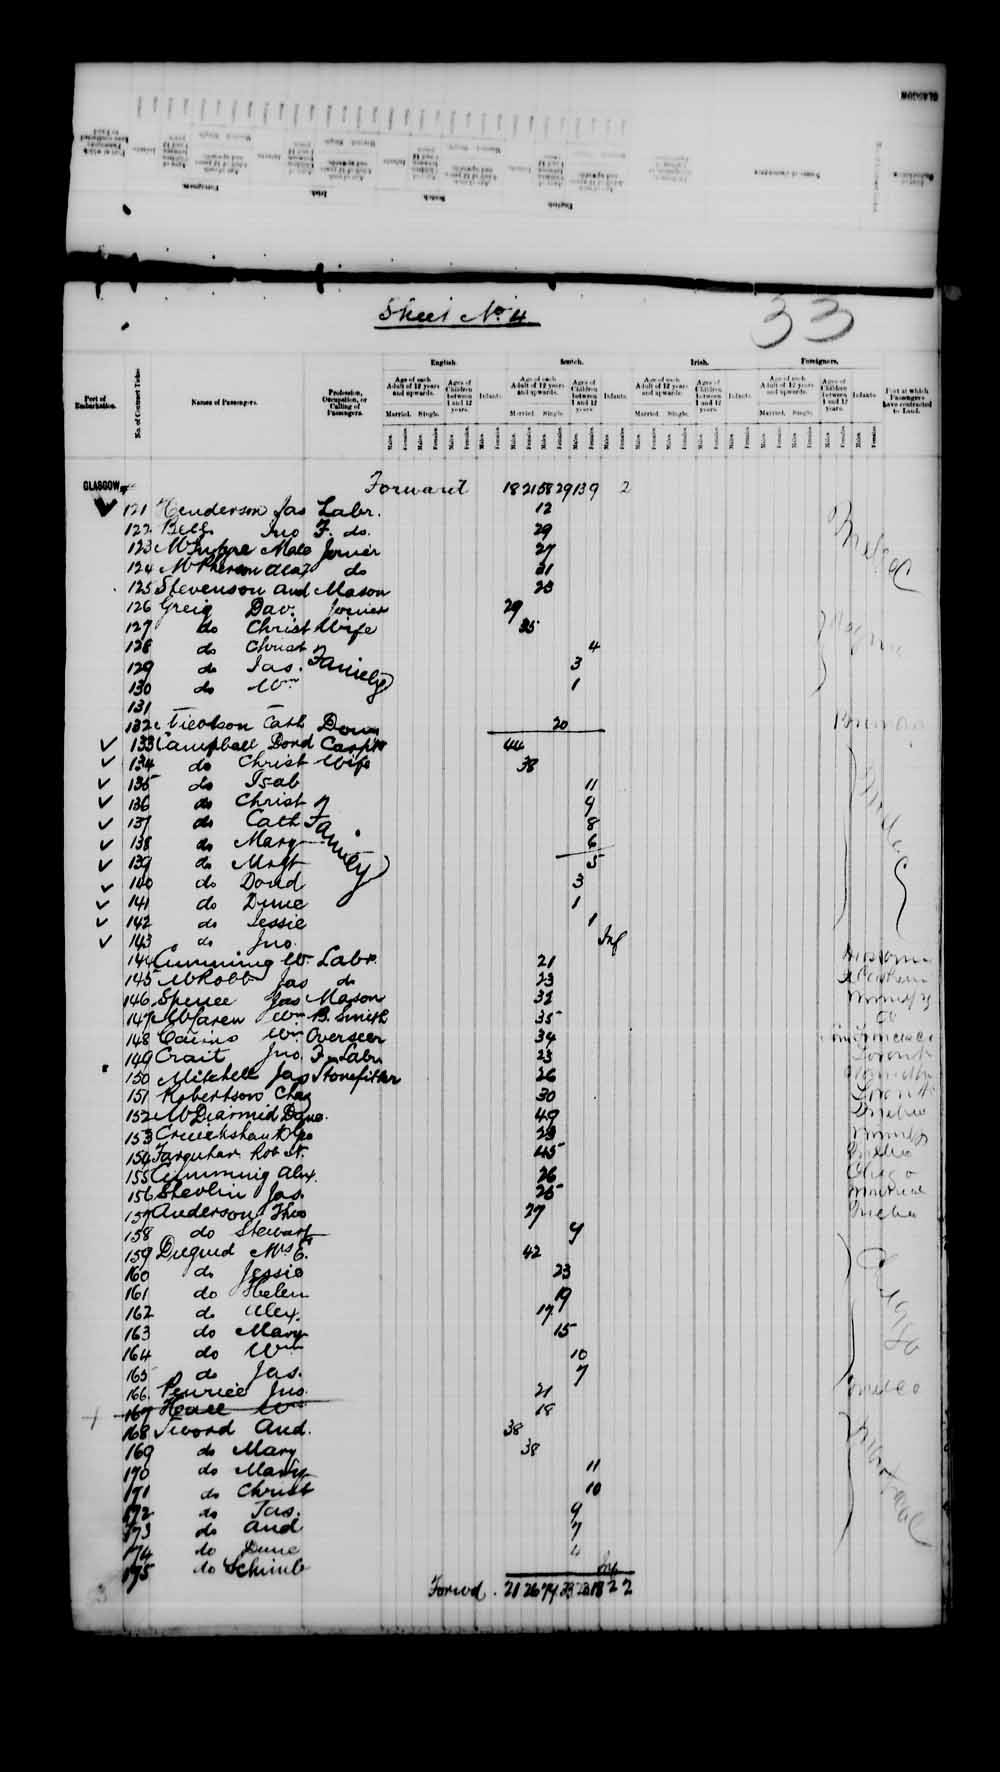 Digitized page of Passenger Lists for Image No.: e003543092